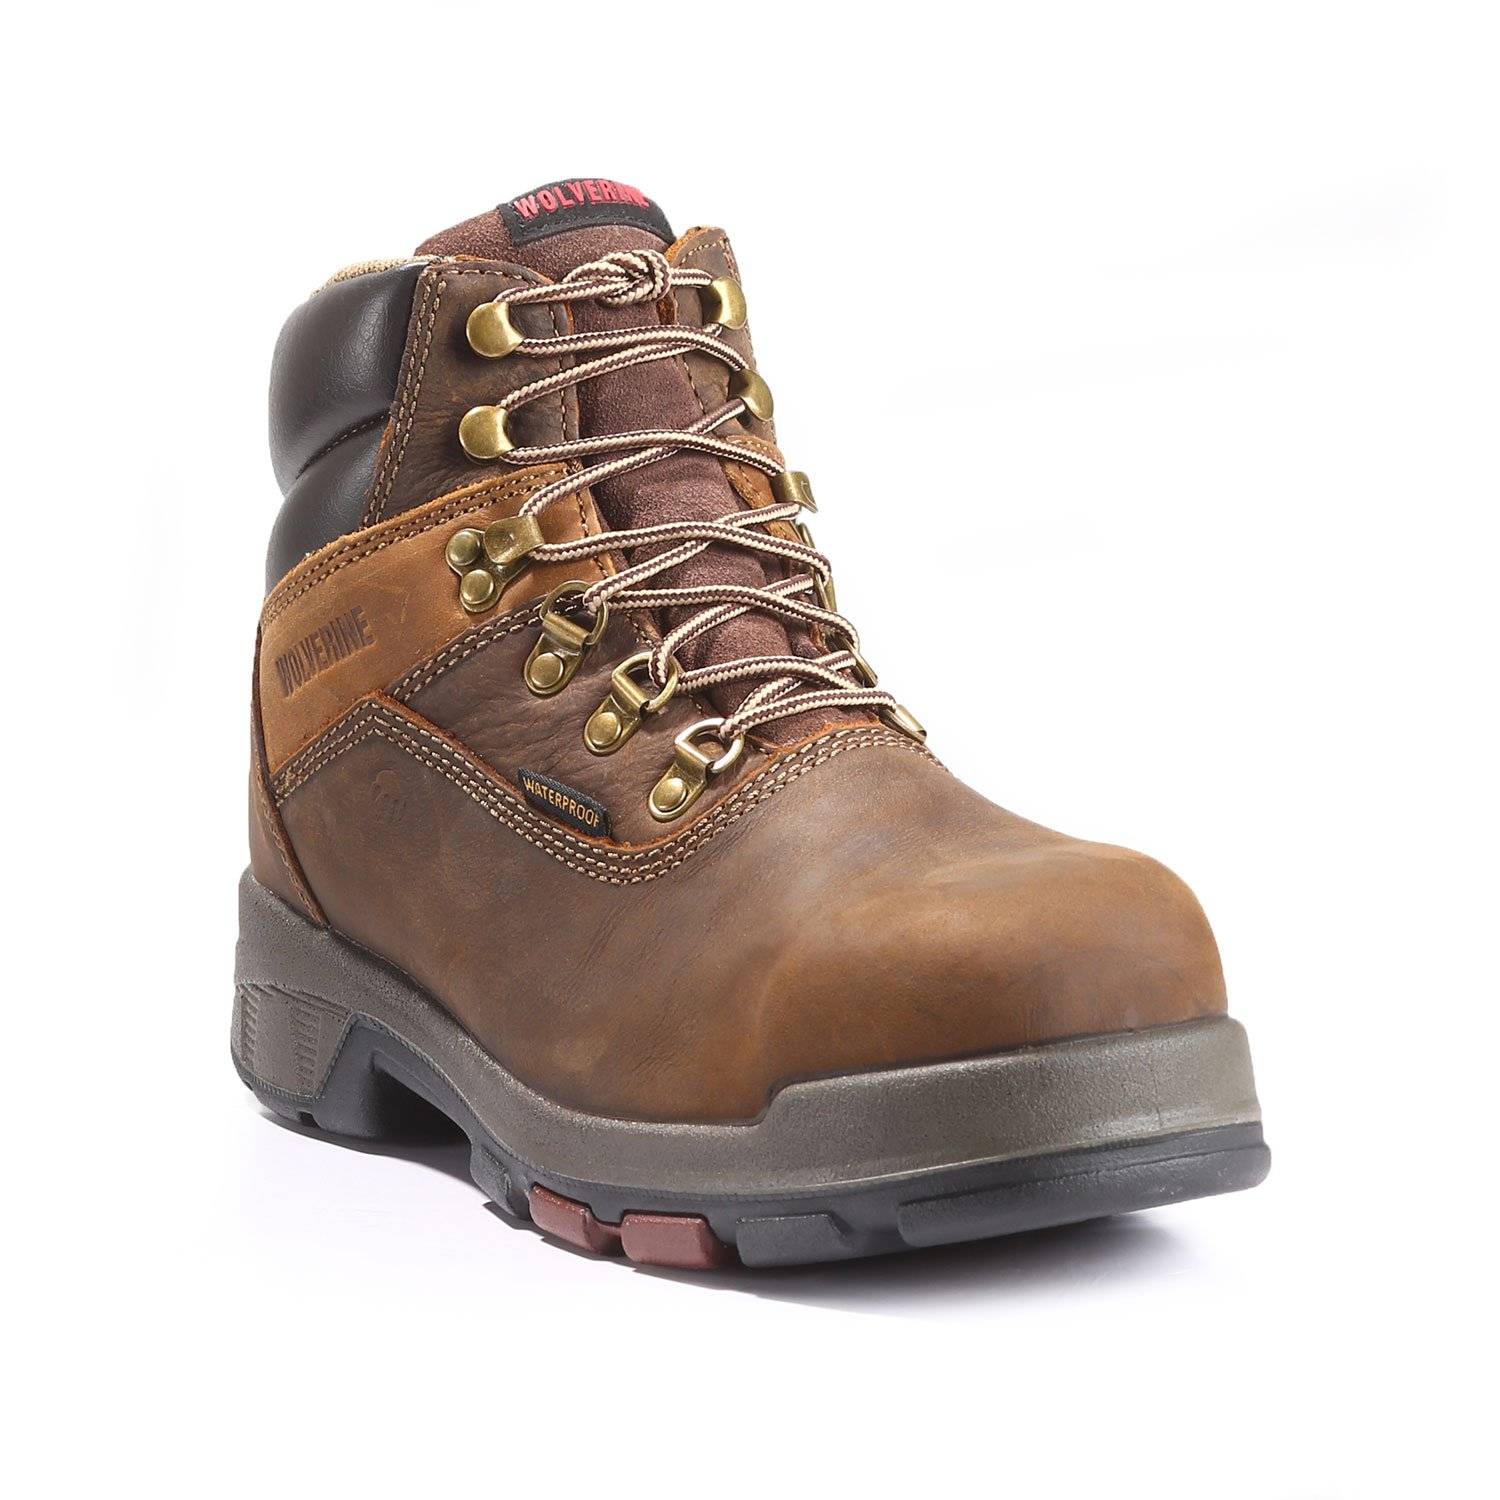 WOLVERINE 6" CABOR EPX WATERPROOF COMPOSITE TOE BOOT